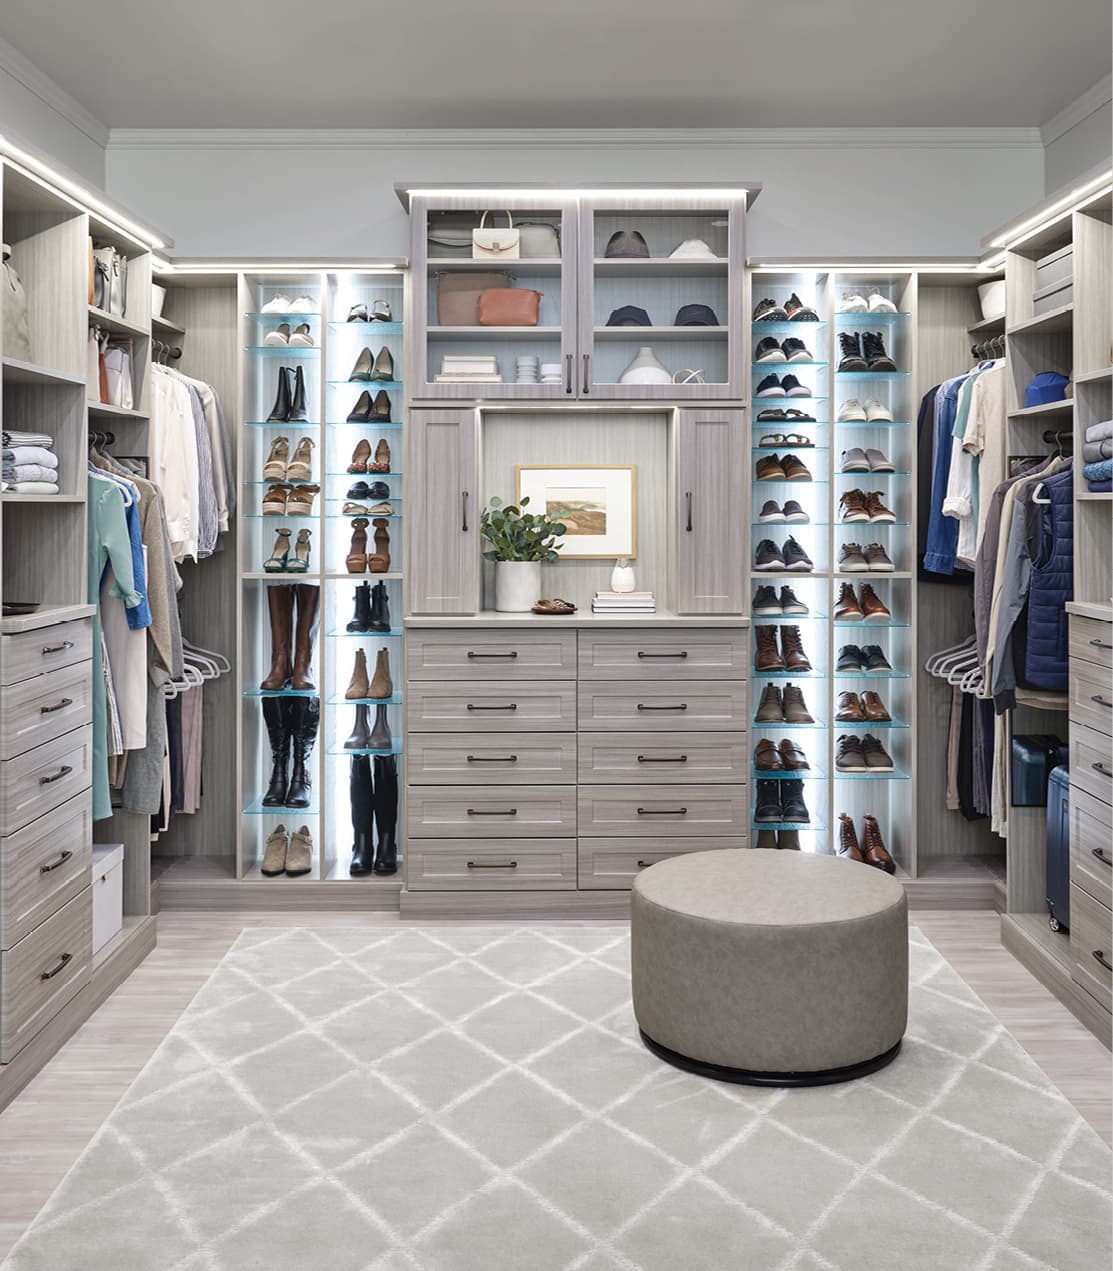 Design Trends to Keep You Organized Inspired image